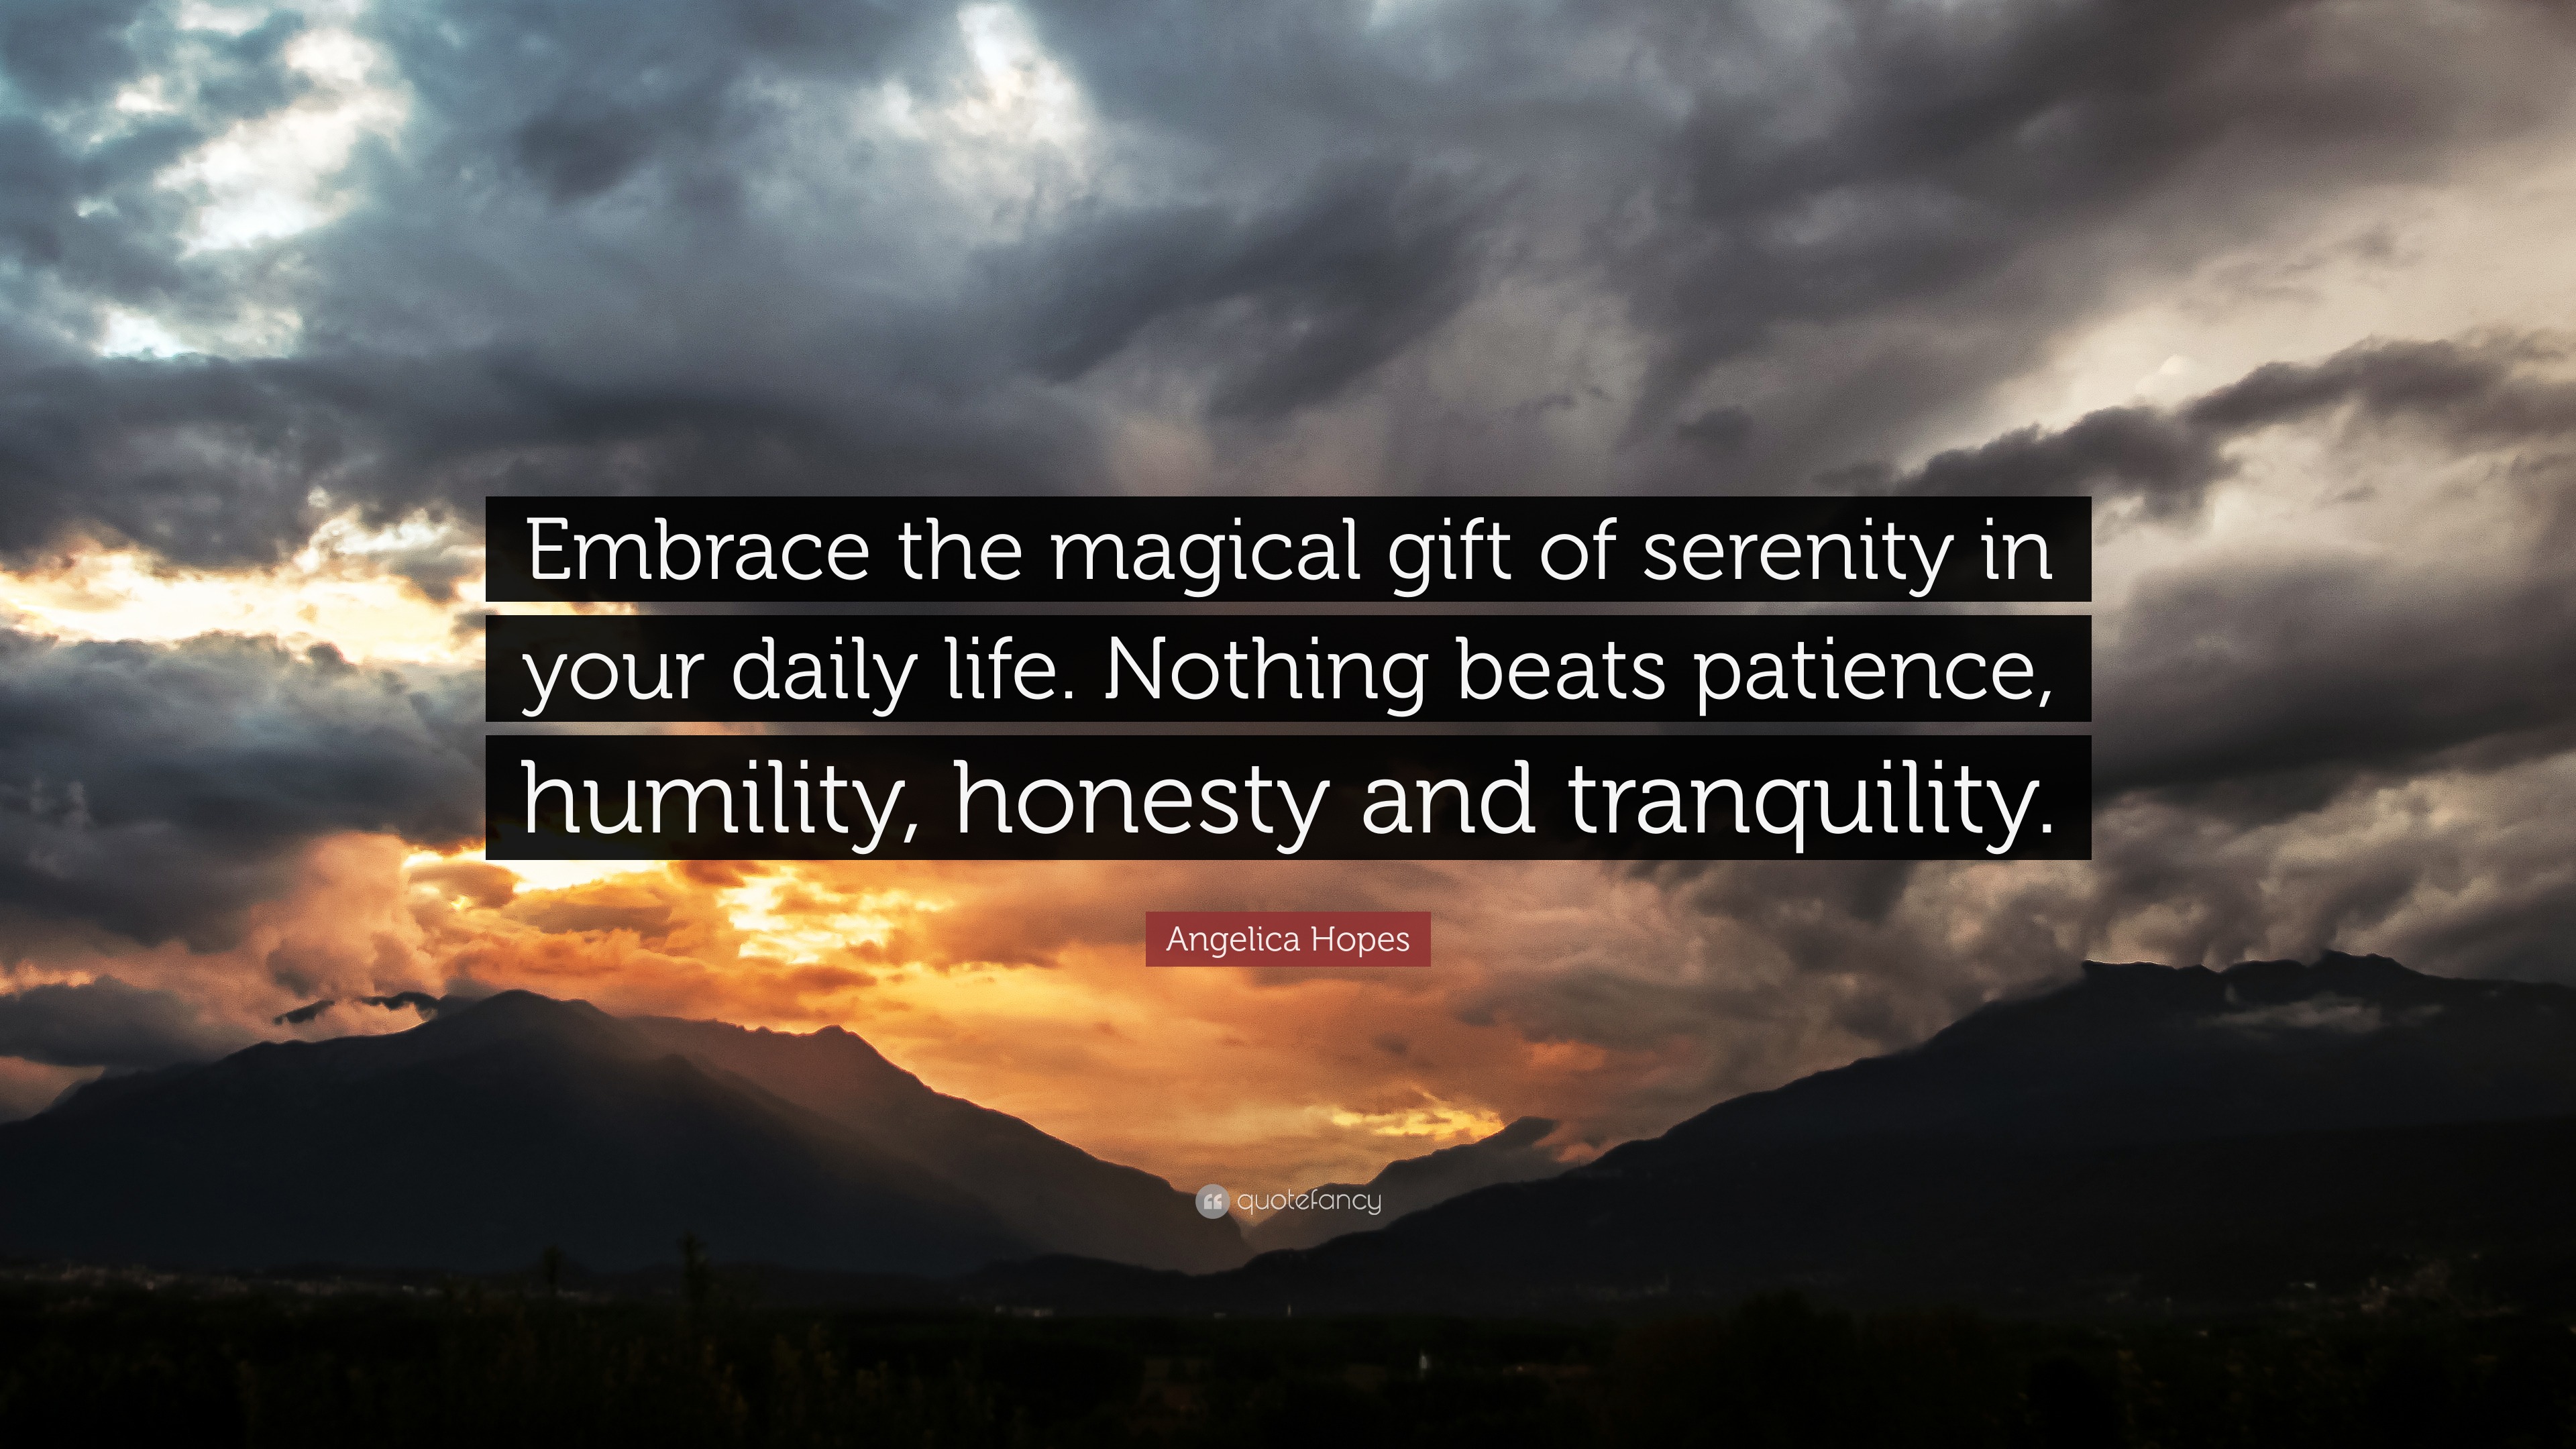 https://quotefancy.com/media/wallpaper/3840x2160/6607412-Angelica-Hopes-Quote-Embrace-the-magical-gift-of-serenity-in-your.jpg